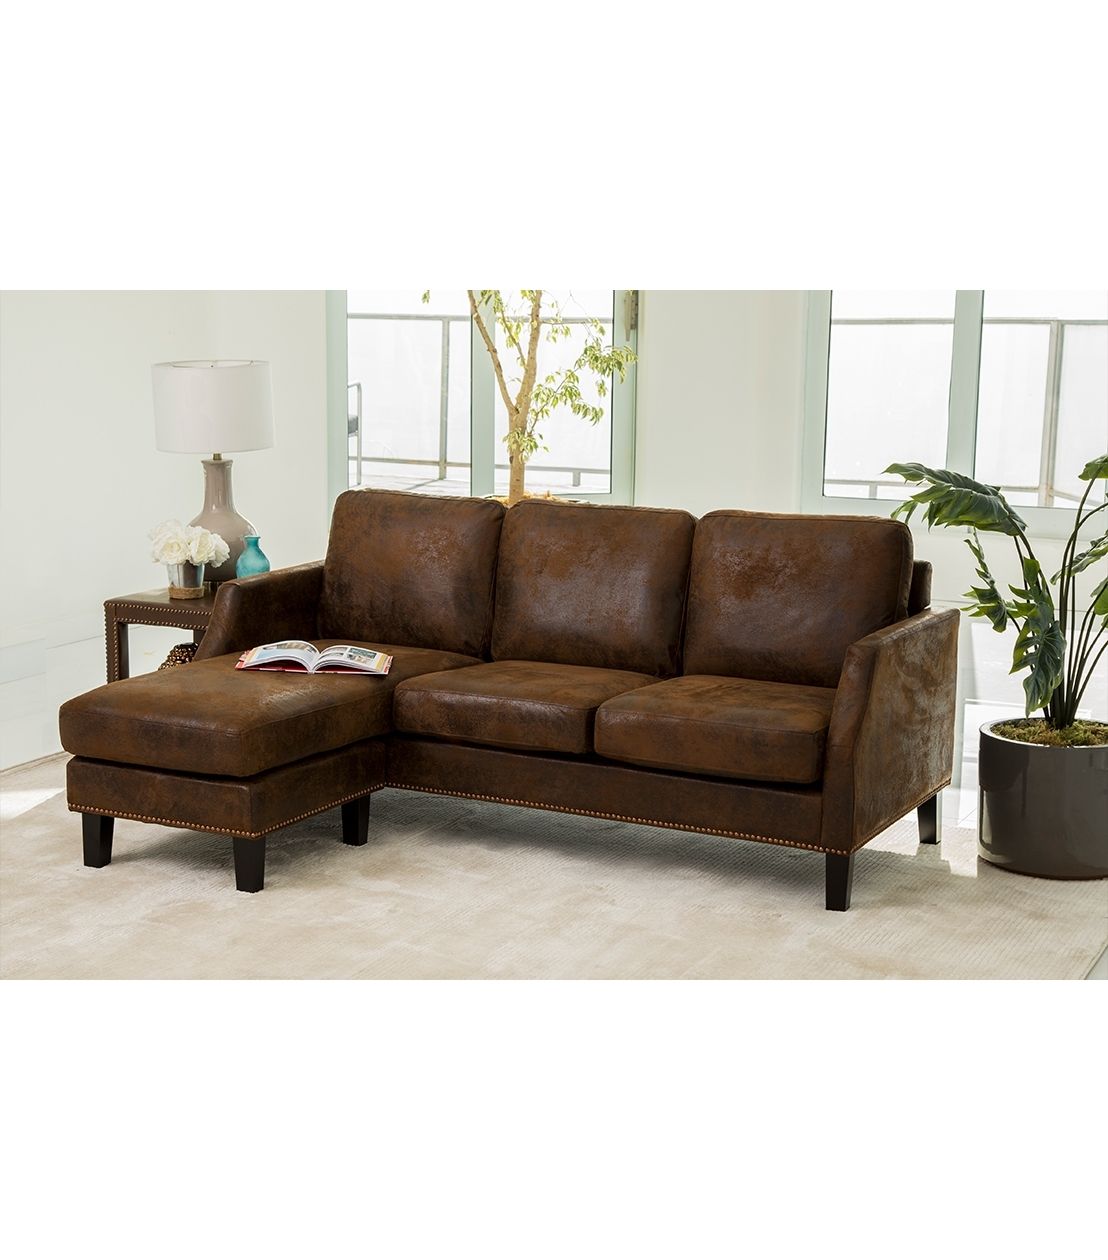 Sectionals In Delano 2 Piece Sectionals With Laf Oversized Chaise (View 9 of 30)